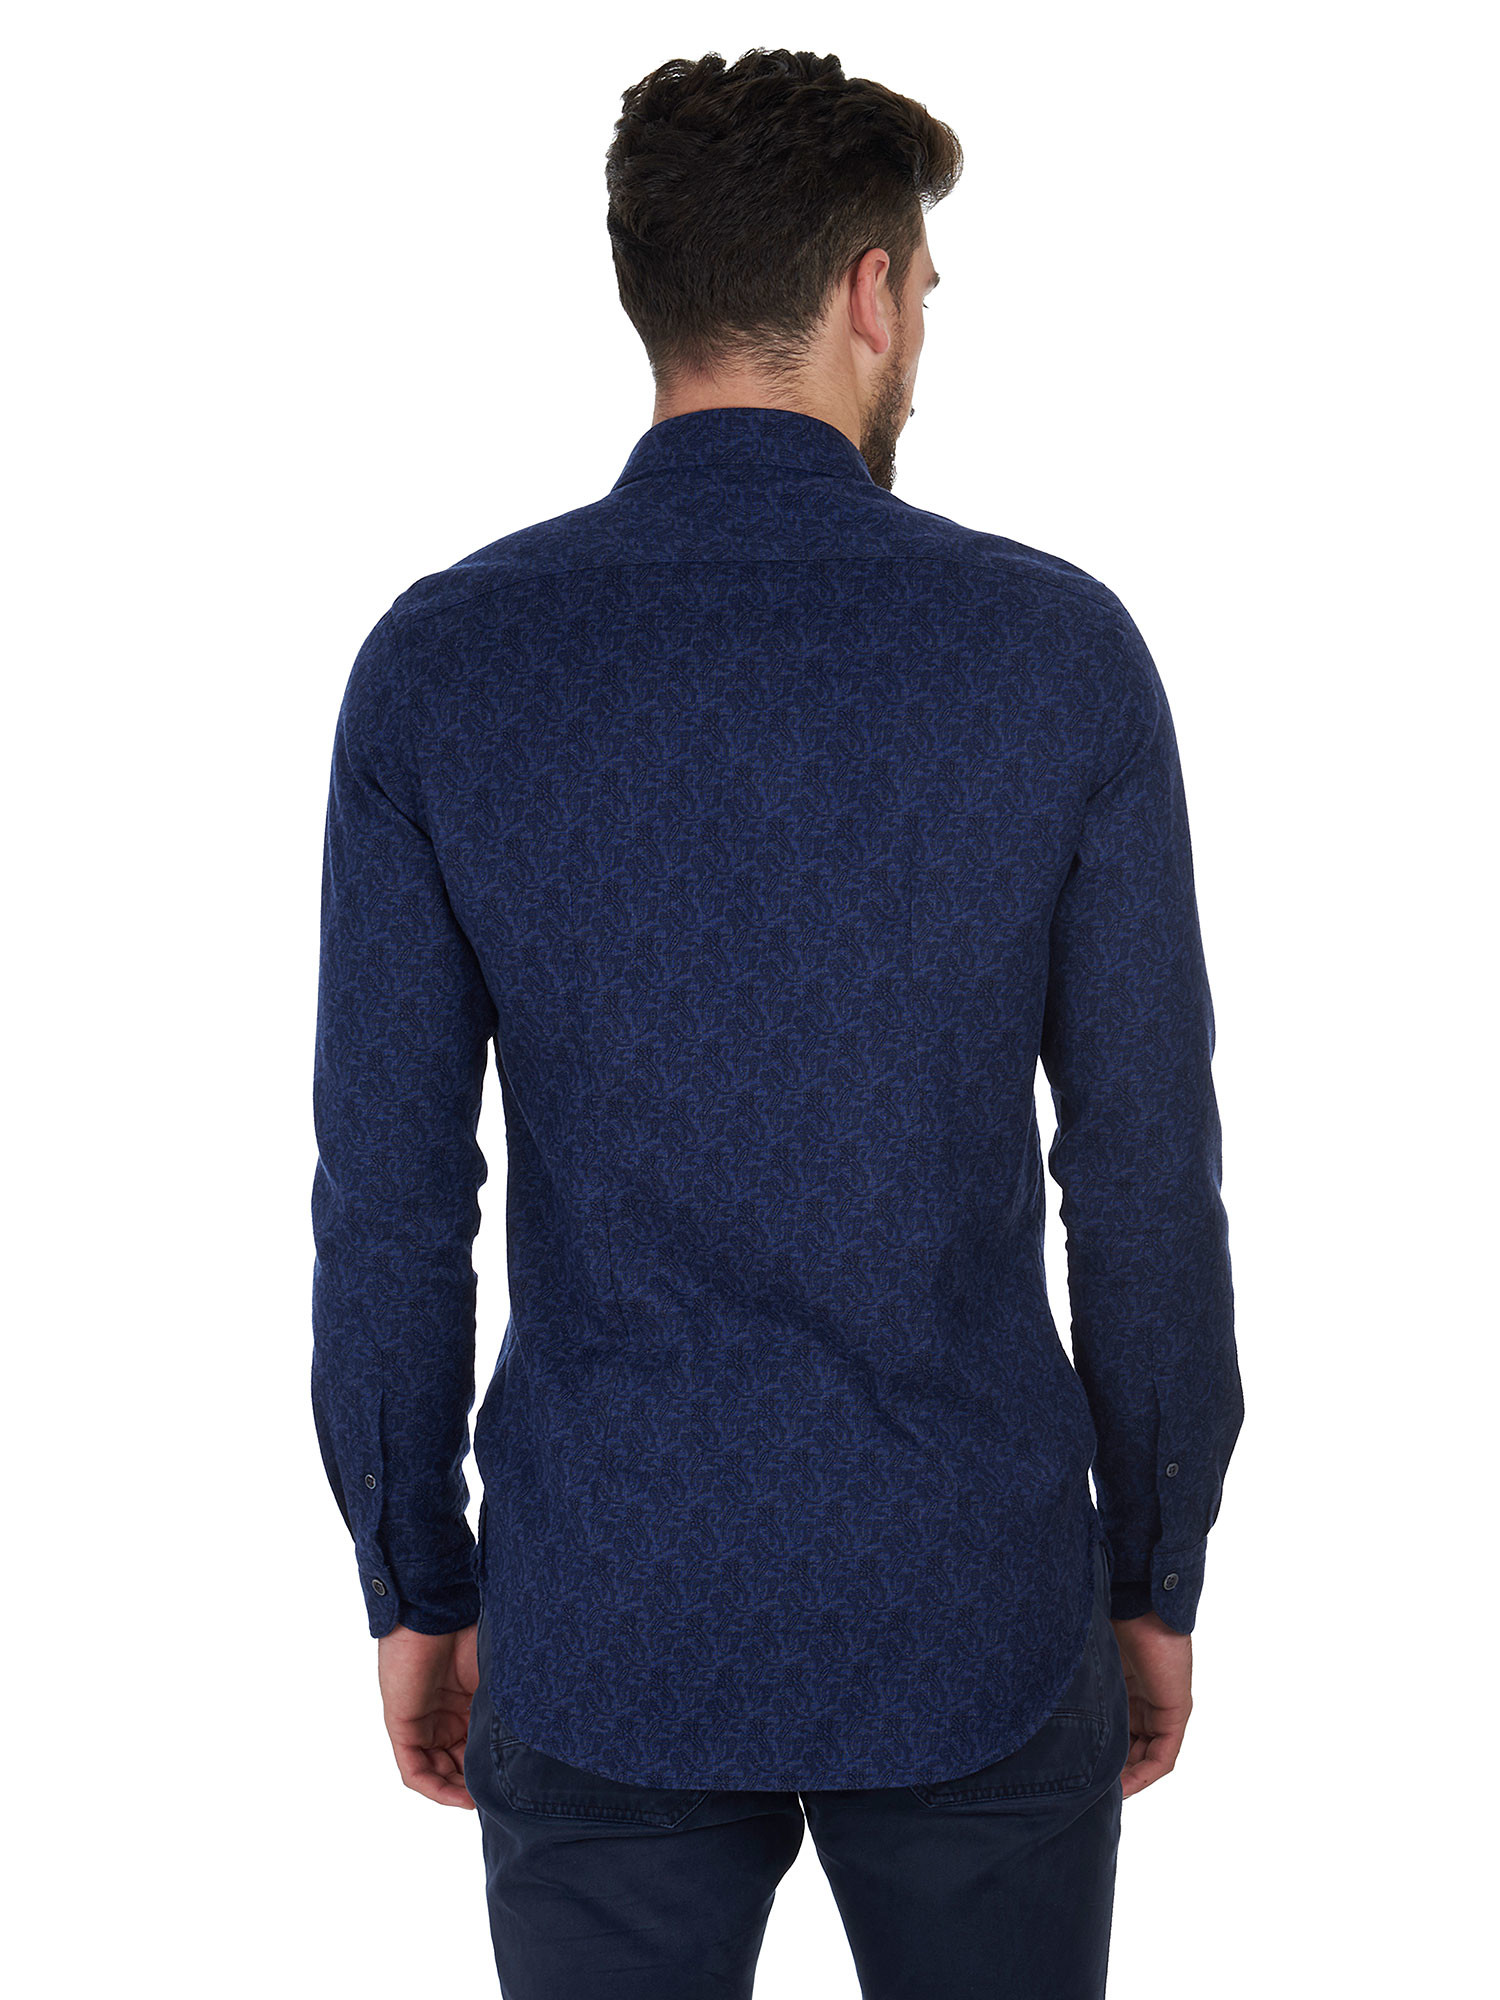 Damask blue shirt with pocket handkerchief included The Sartorialist